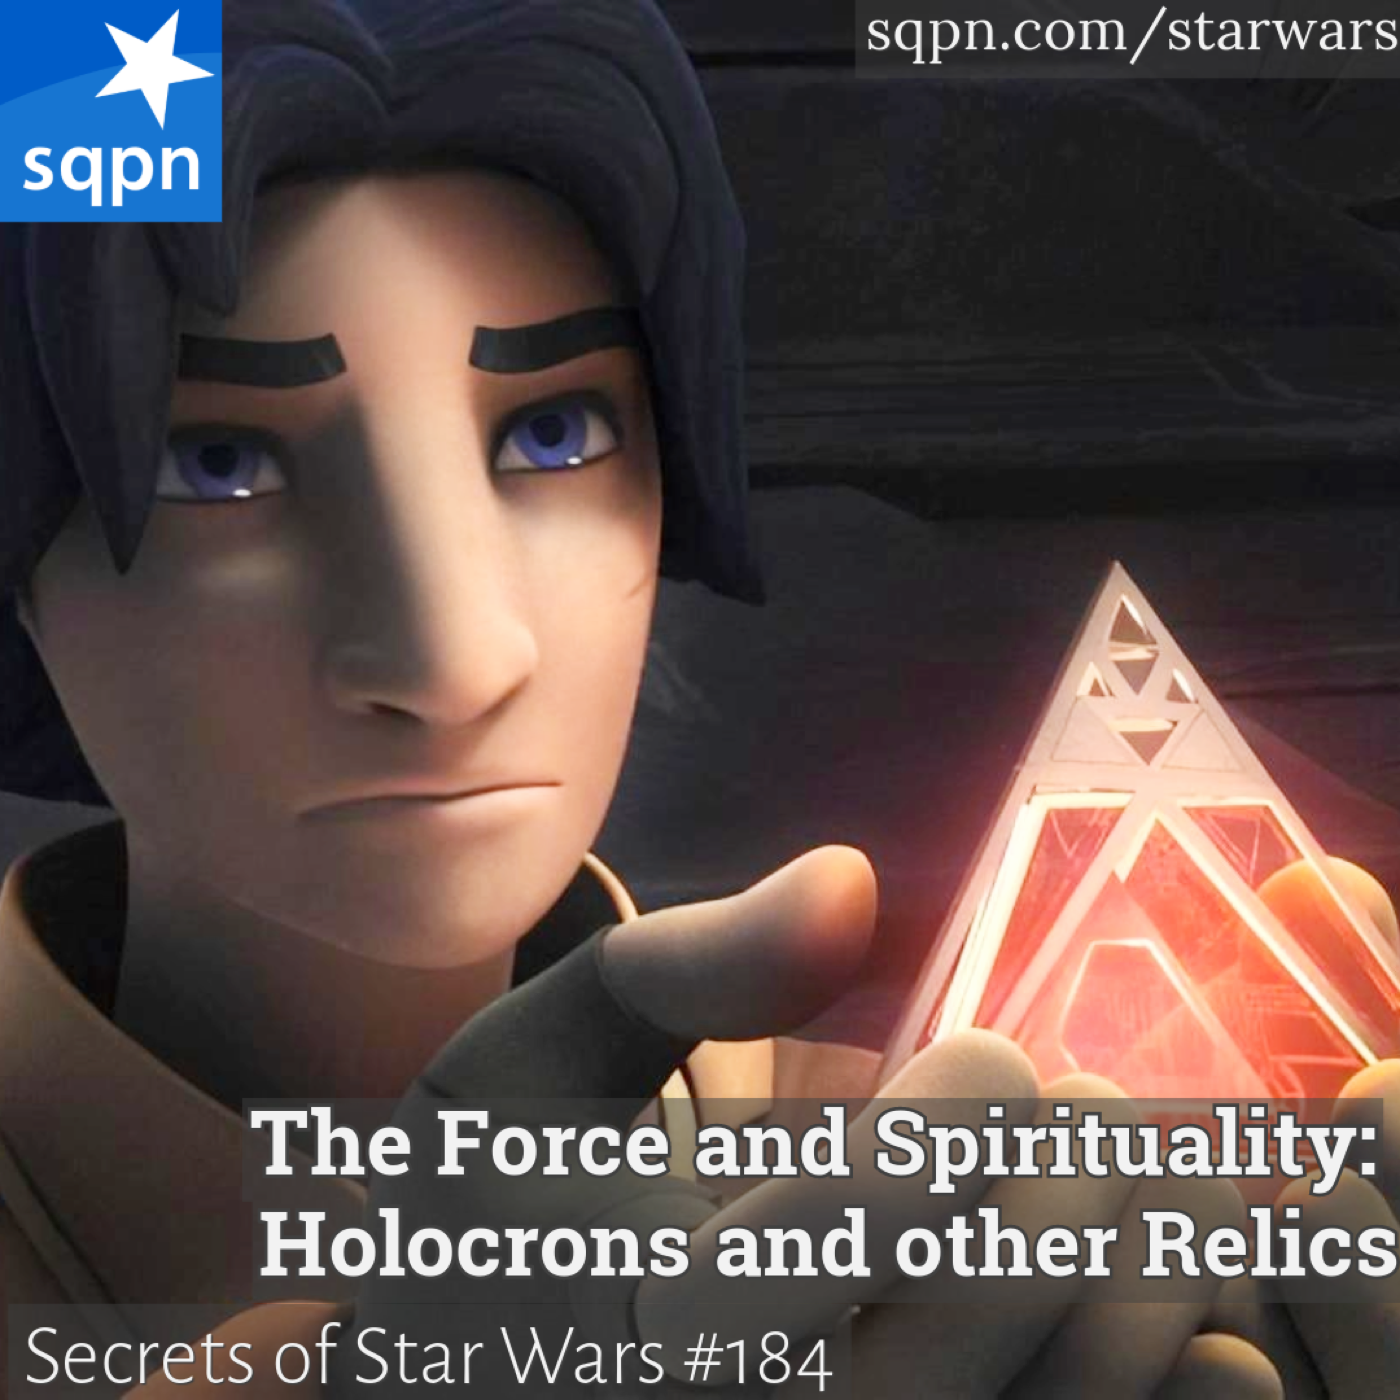 The Force and Spirituality: Holocrons and other Relics